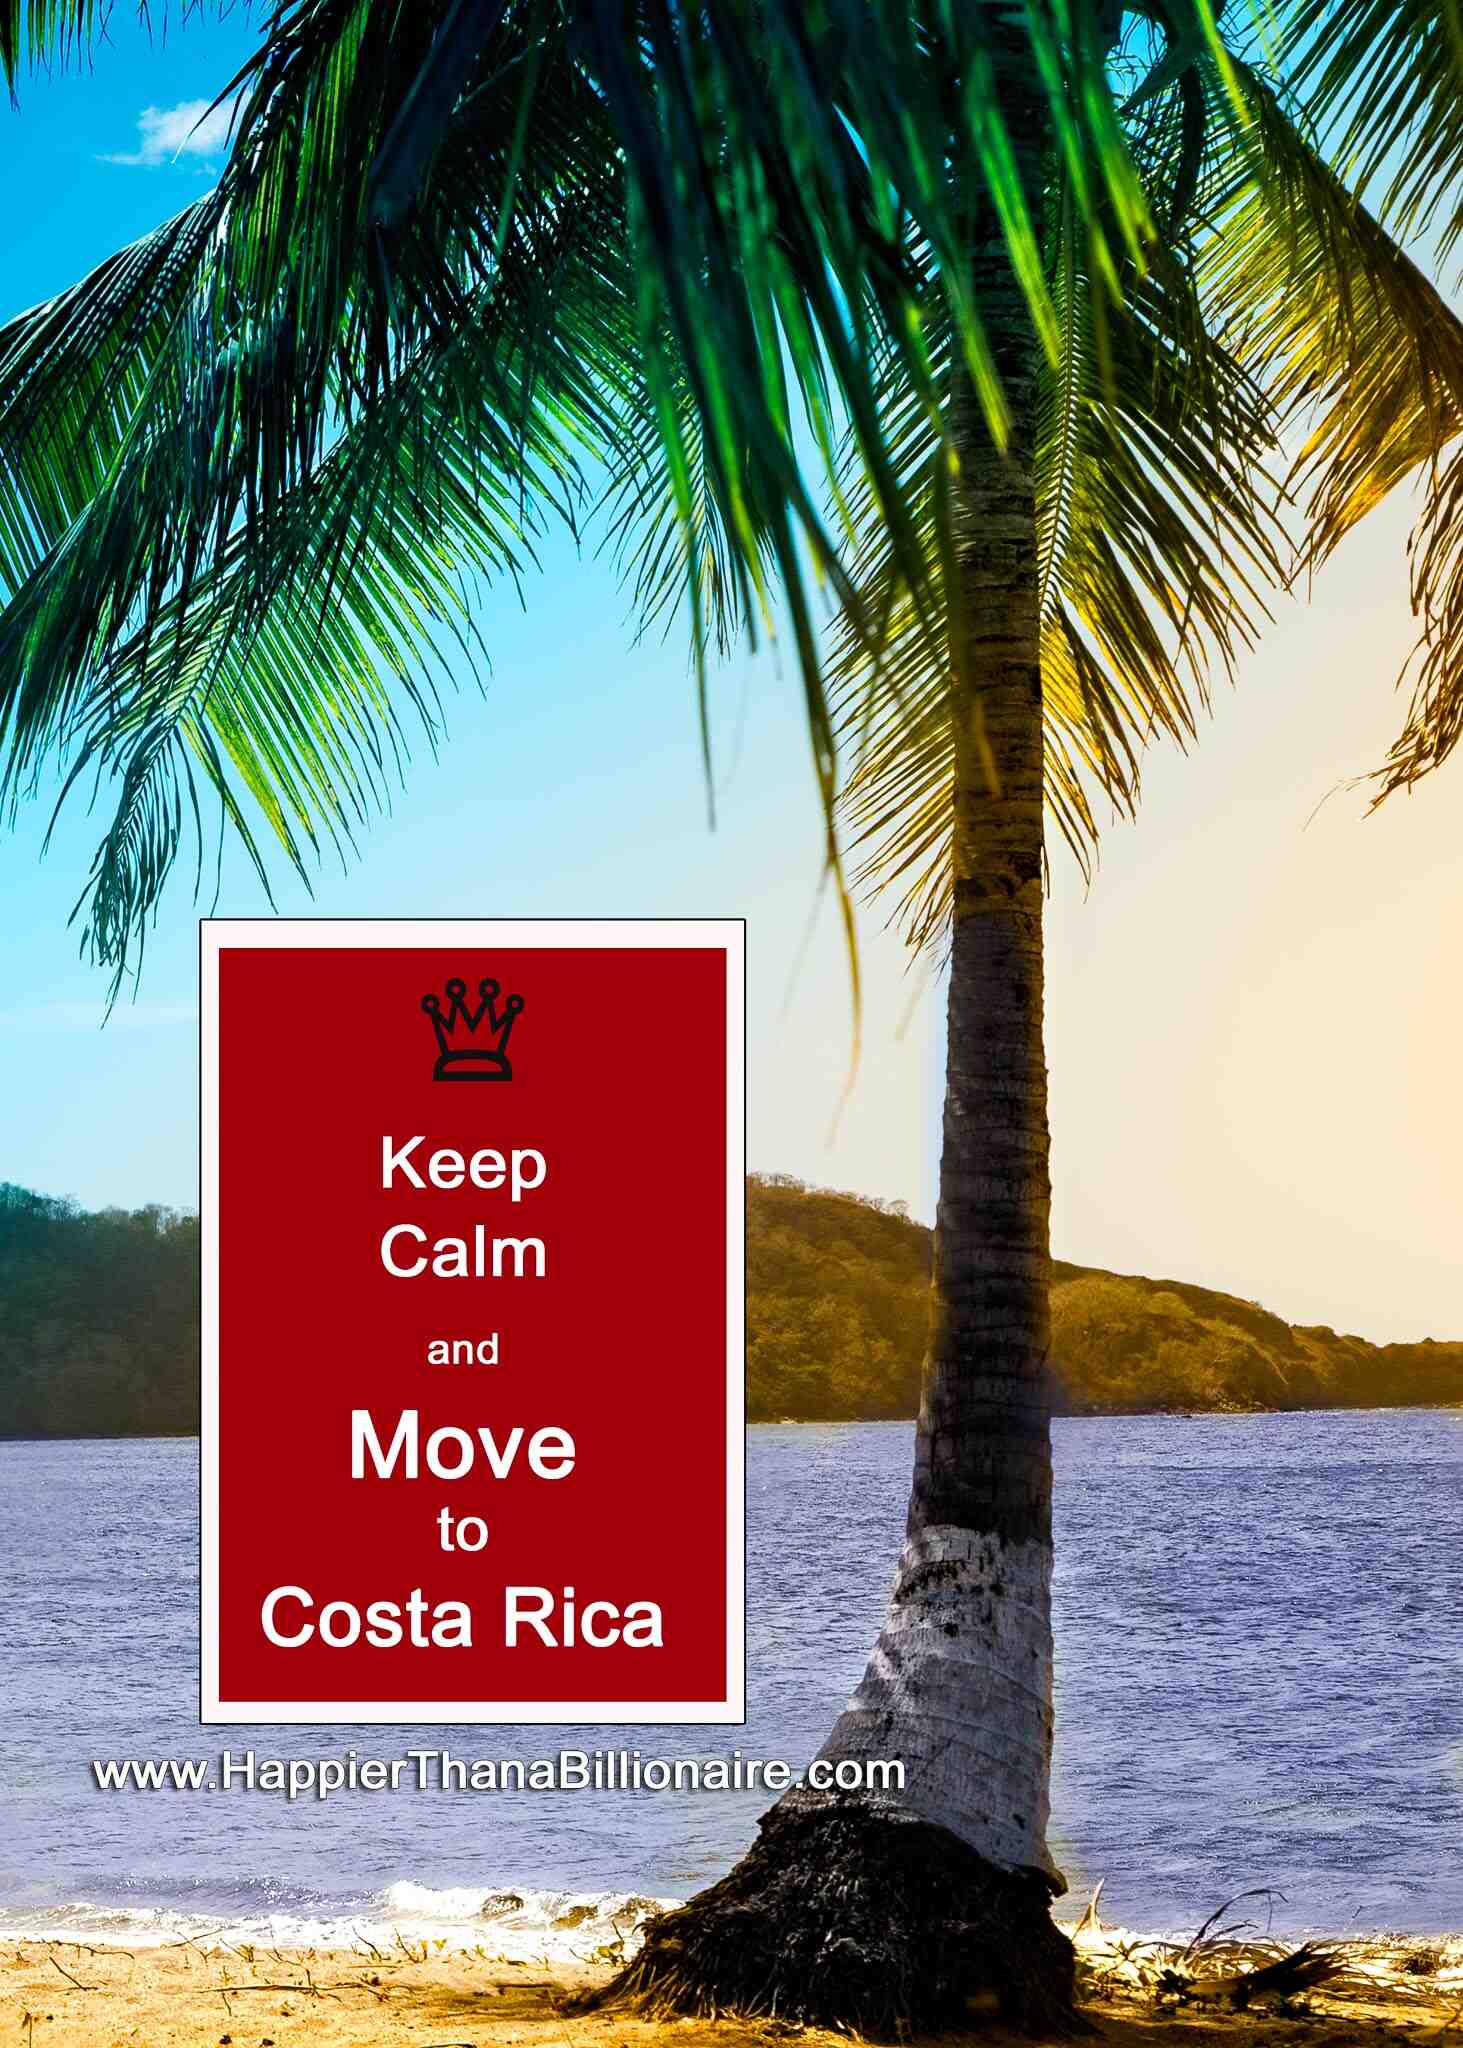 Comment bouger au Costa Rica ?